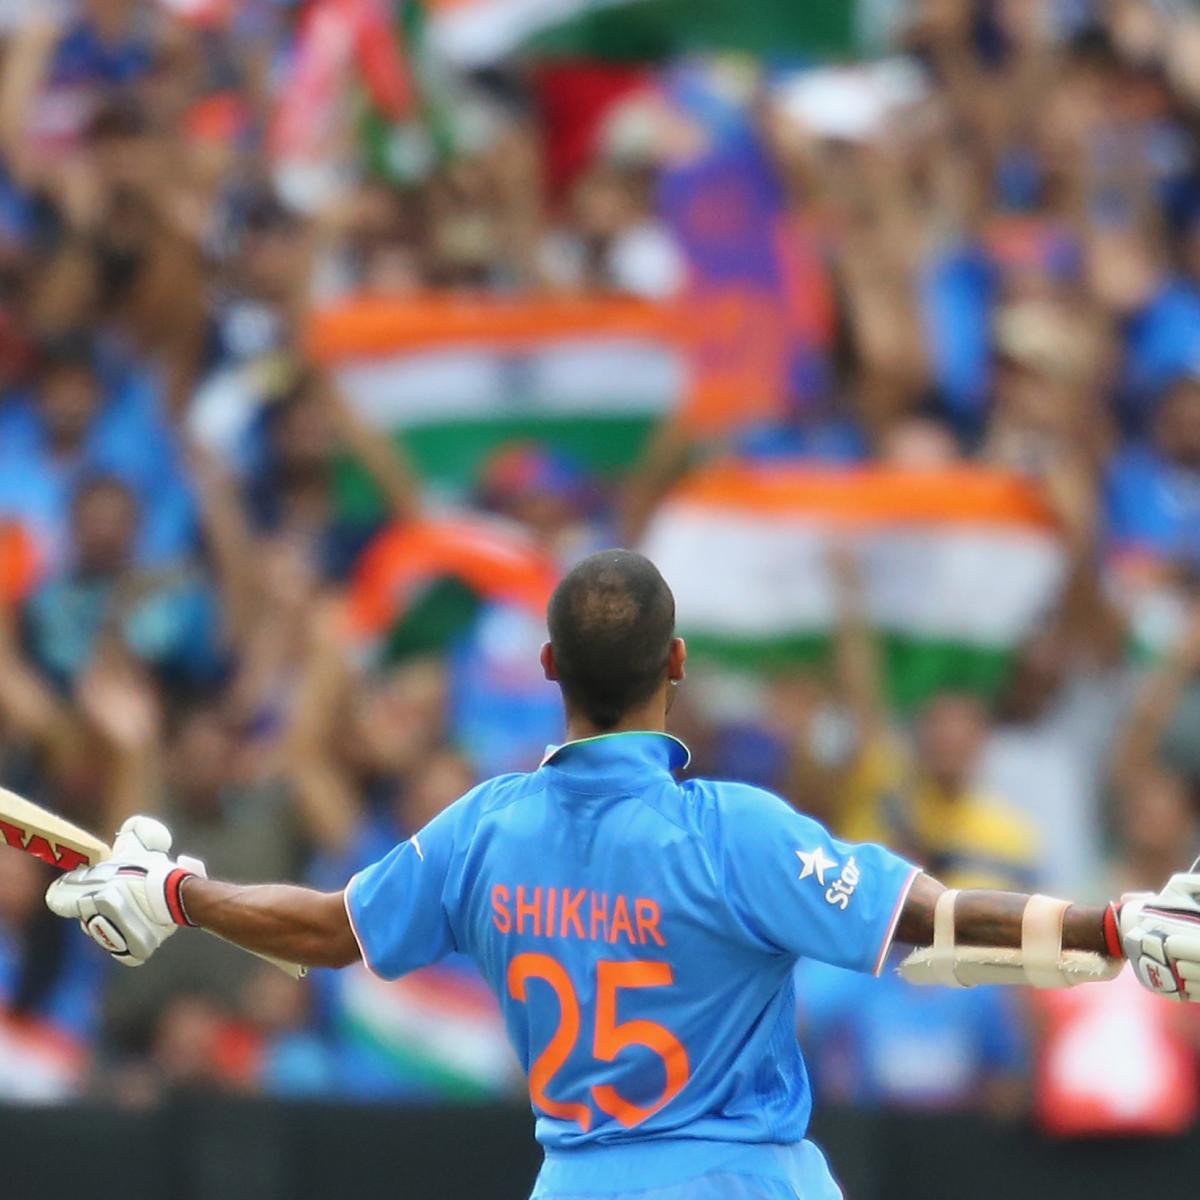 Cricket World Cup 2015: Latest Record Holders, Top Wicket-Takers and More | Bleacher ...